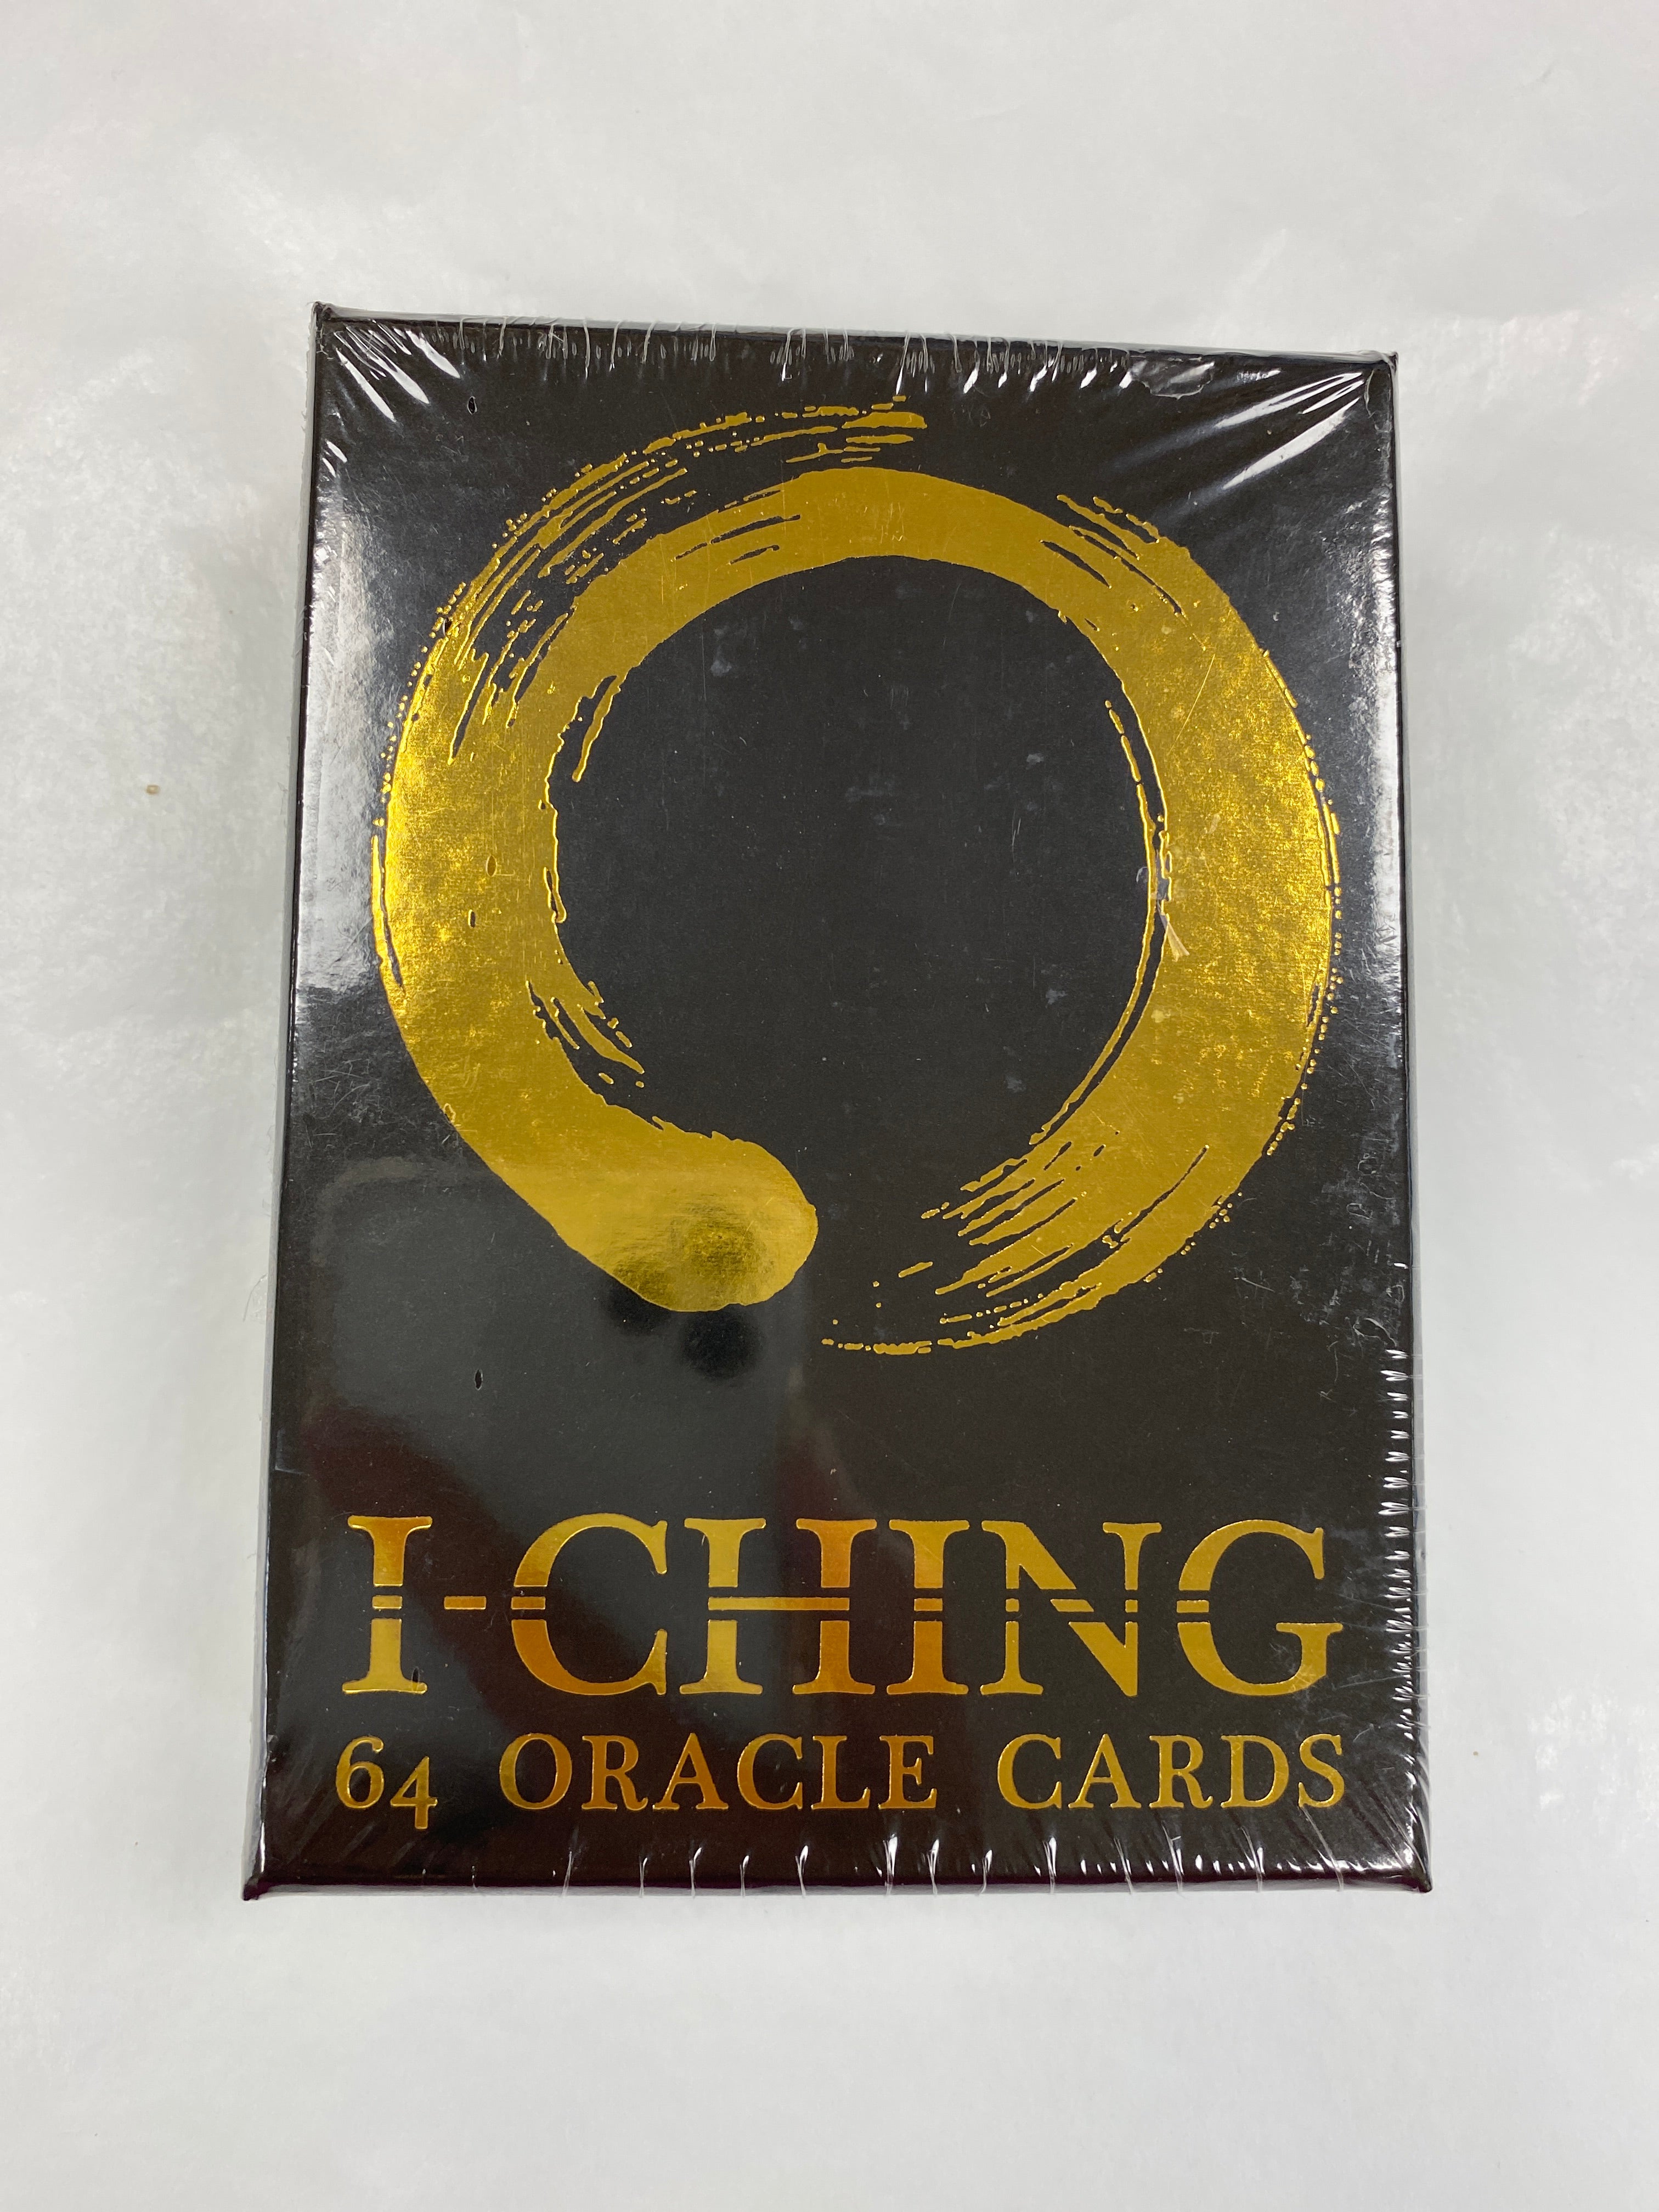 I-Ching Oracle